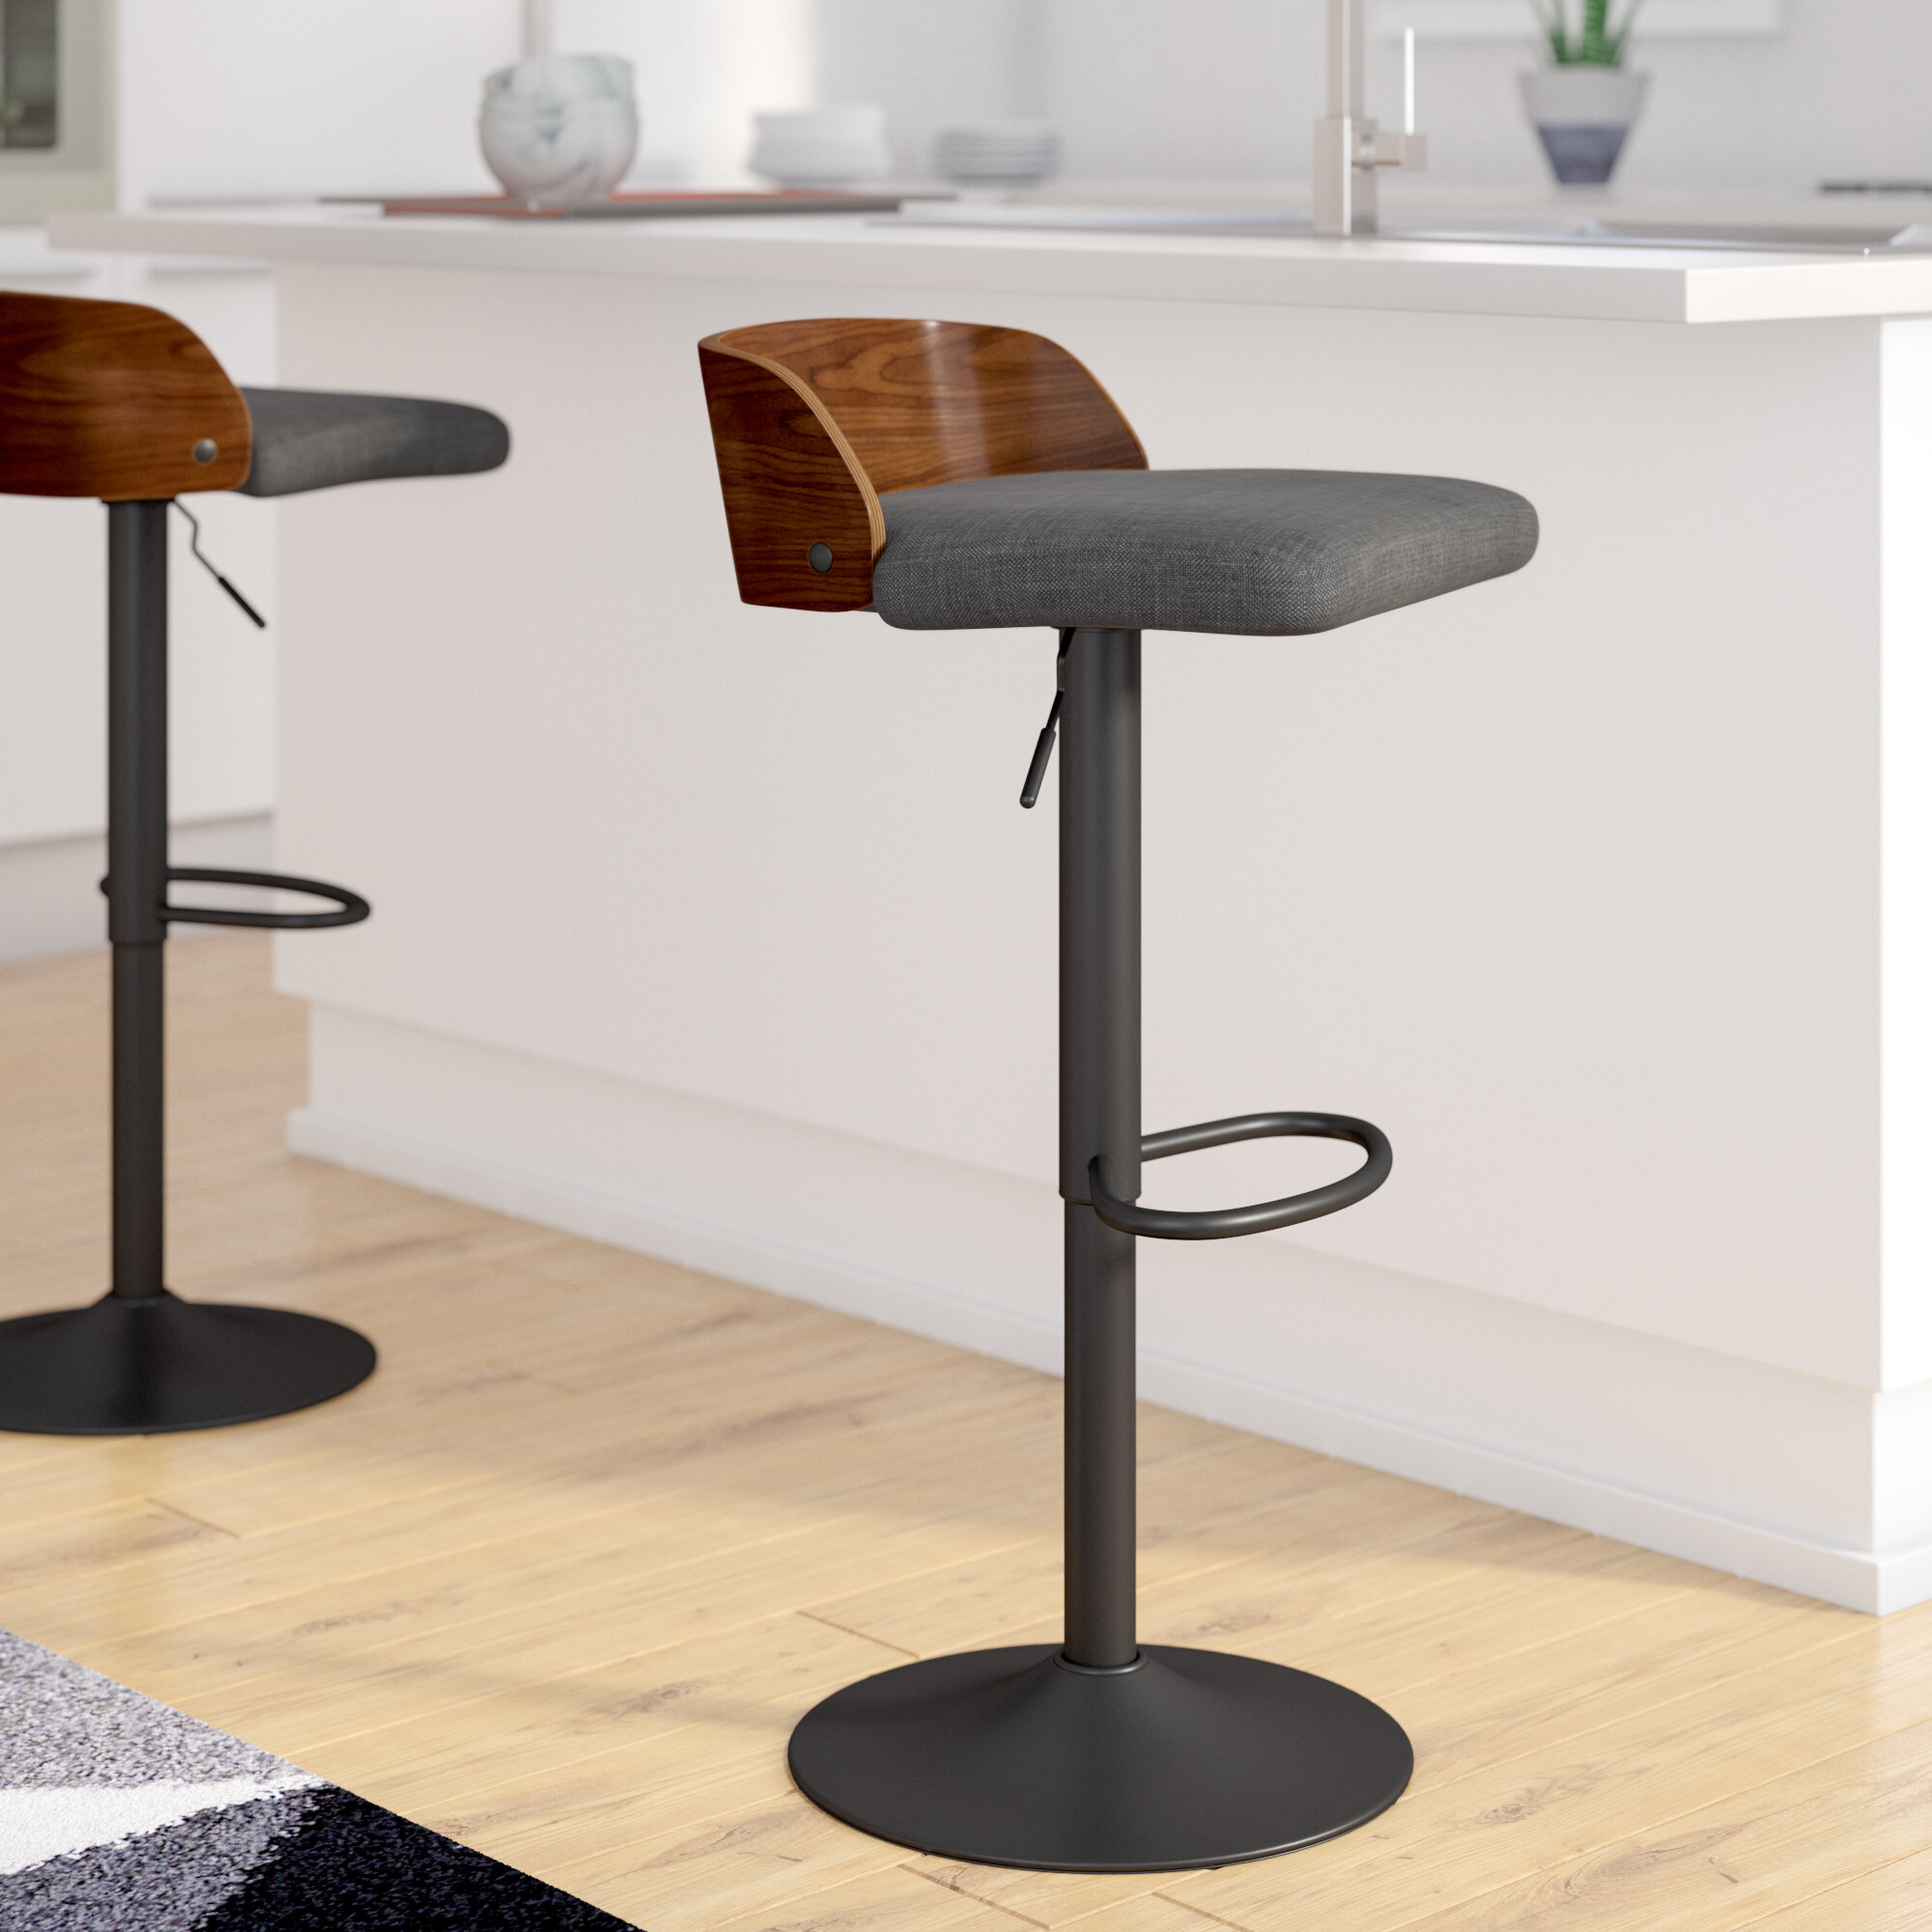 Black 360° Swivel Kitchen Stool with Footrest Chrome-Plated Steel Height Adjustable Bar Chairs in Synthetic Leather Panana Bar Stool Set of 2 